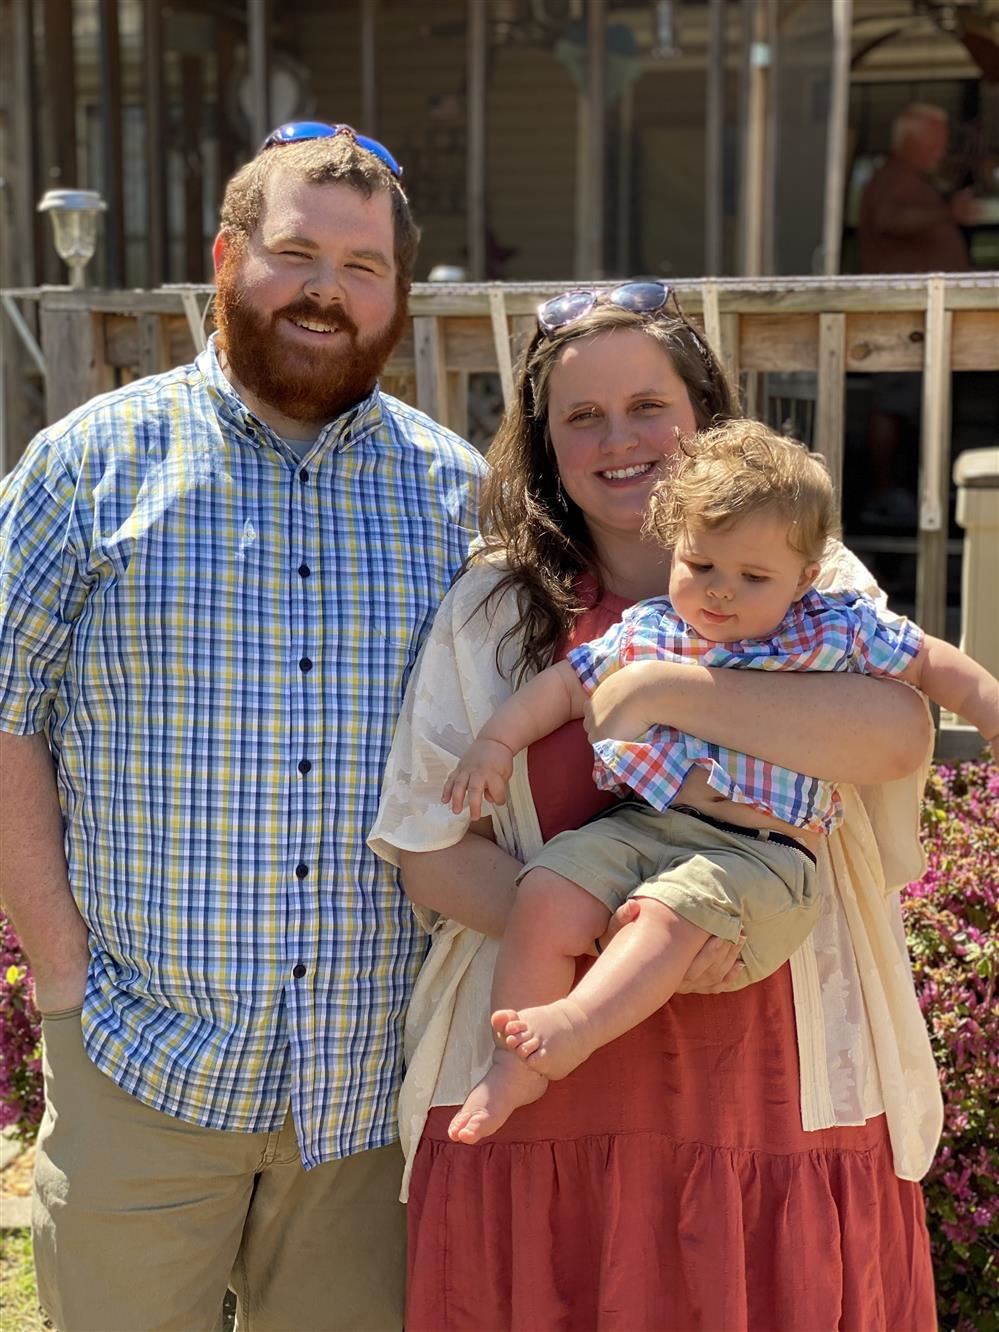  Family picture of Mrs. Blackmon with her husband, Quintin, and their son, Walker